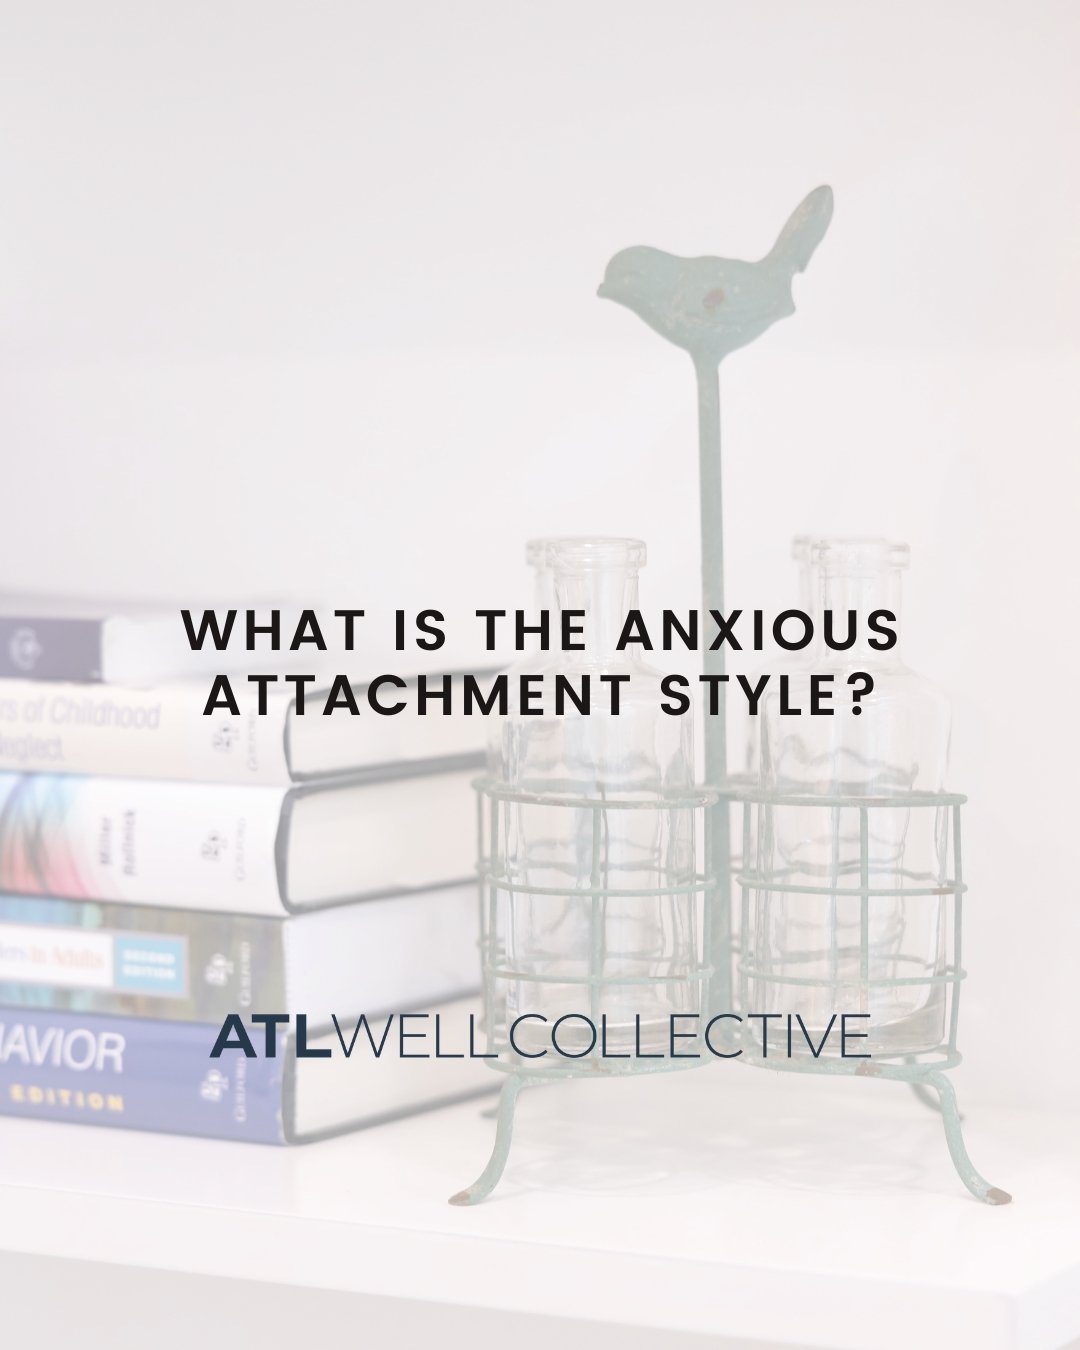 ON THE BLOG - Breaking Down Attachment Styles: Anxious Attachment by Amanda Shyer, MA, LAPC, NCC

Visit our blog - - Amanda continues her series on attachment styles and takes a look at an anxious attachment style.

Go to atlwell.com/blog &mdash; or 